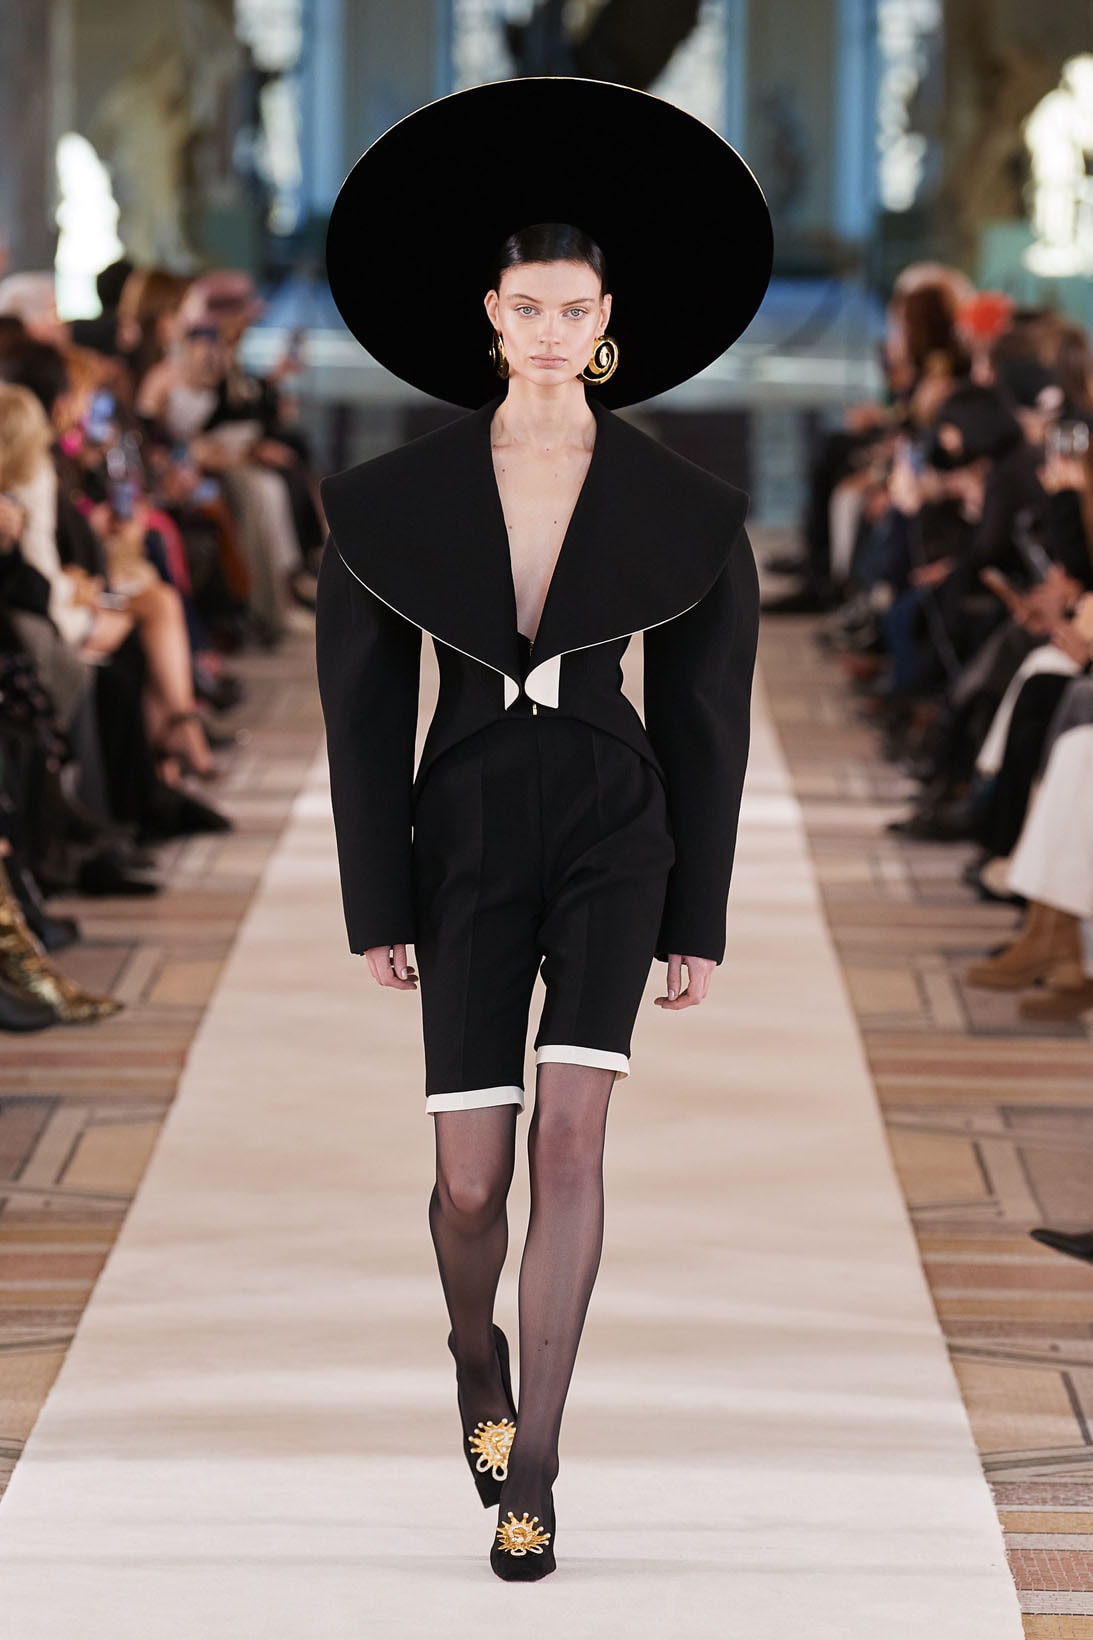 SPRING-SUMMER 2022 RUNWAY COLLECTION